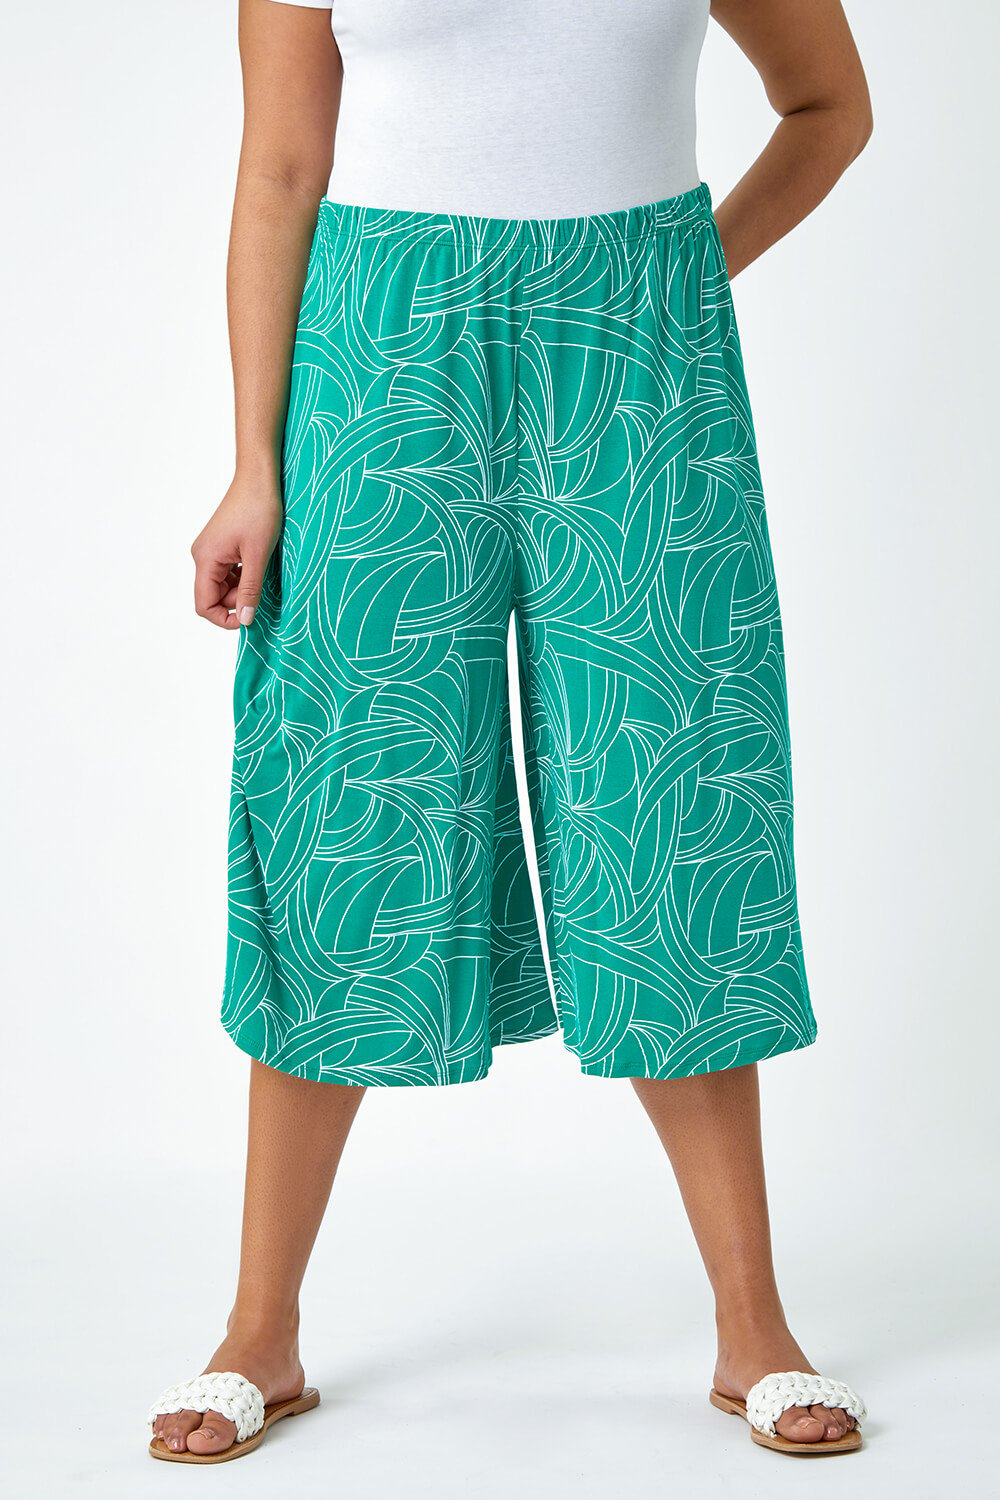 Green Curve Abstract Swirl Stretch Culottes, Image 4 of 5